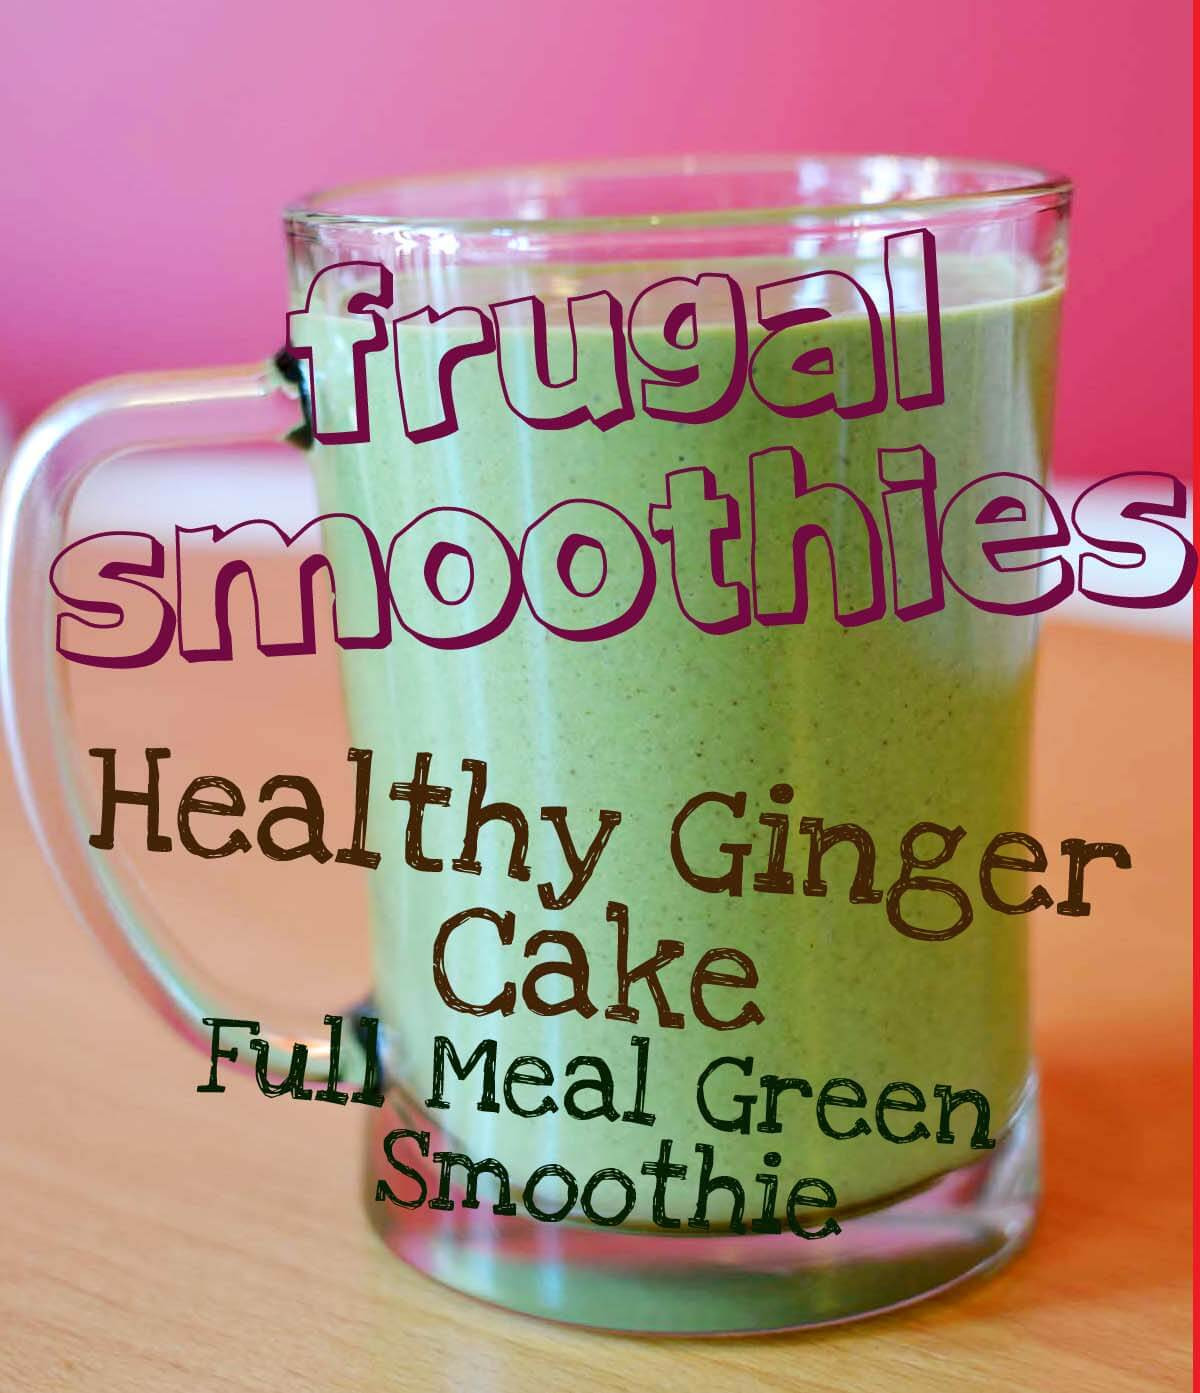 Cheap Healthy Smoothies
 Cheap Smoothies 1 Healthy Ginger Cake Frugal Full Meal